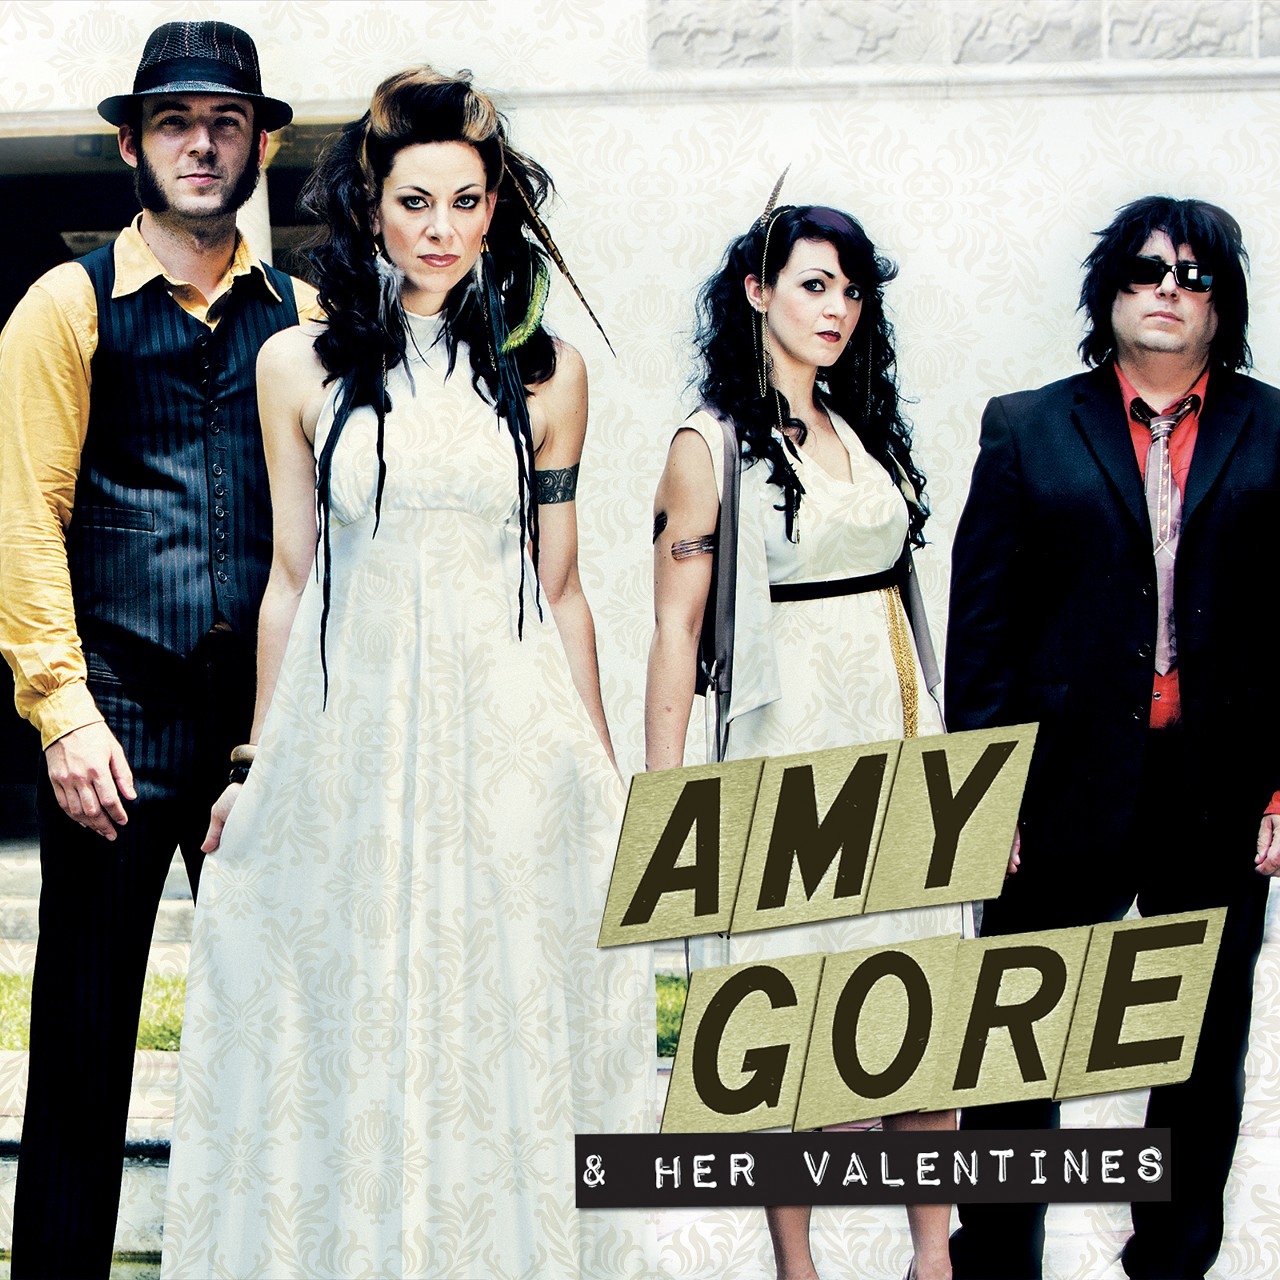 Amy Gore & Her Valentines (9/1 8 p.m. Arts Beats & Eats)
Rock chicks singing about cars and partying, power-pop style? Count us in. Mind you, Gore can write a sweet ballad too. 
Click here for more info